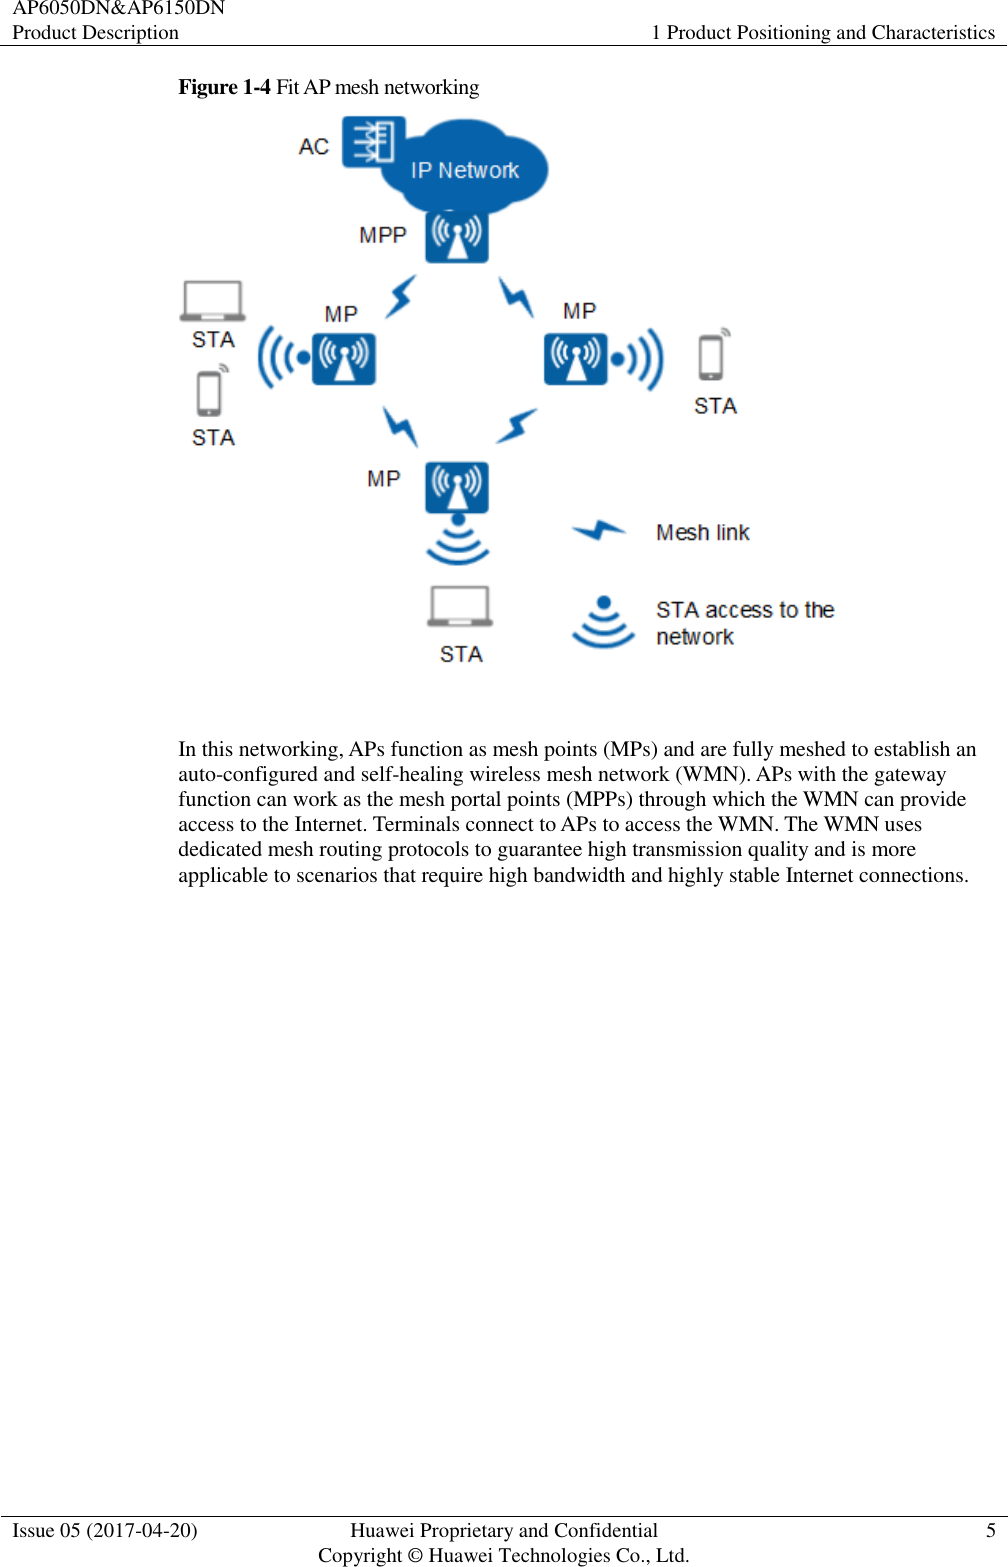 AP6050DN&amp;AP6150DN Product Description 1 Product Positioning and Characteristics  Issue 05 (2017-04-20) Huawei Proprietary and Confidential                                     Copyright © Huawei Technologies Co., Ltd. 5  Figure 1-4 Fit AP mesh networking   In this networking, APs function as mesh points (MPs) and are fully meshed to establish an auto-configured and self-healing wireless mesh network (WMN). APs with the gateway function can work as the mesh portal points (MPPs) through which the WMN can provide access to the Internet. Terminals connect to APs to access the WMN. The WMN uses dedicated mesh routing protocols to guarantee high transmission quality and is more applicable to scenarios that require high bandwidth and highly stable Internet connections. 